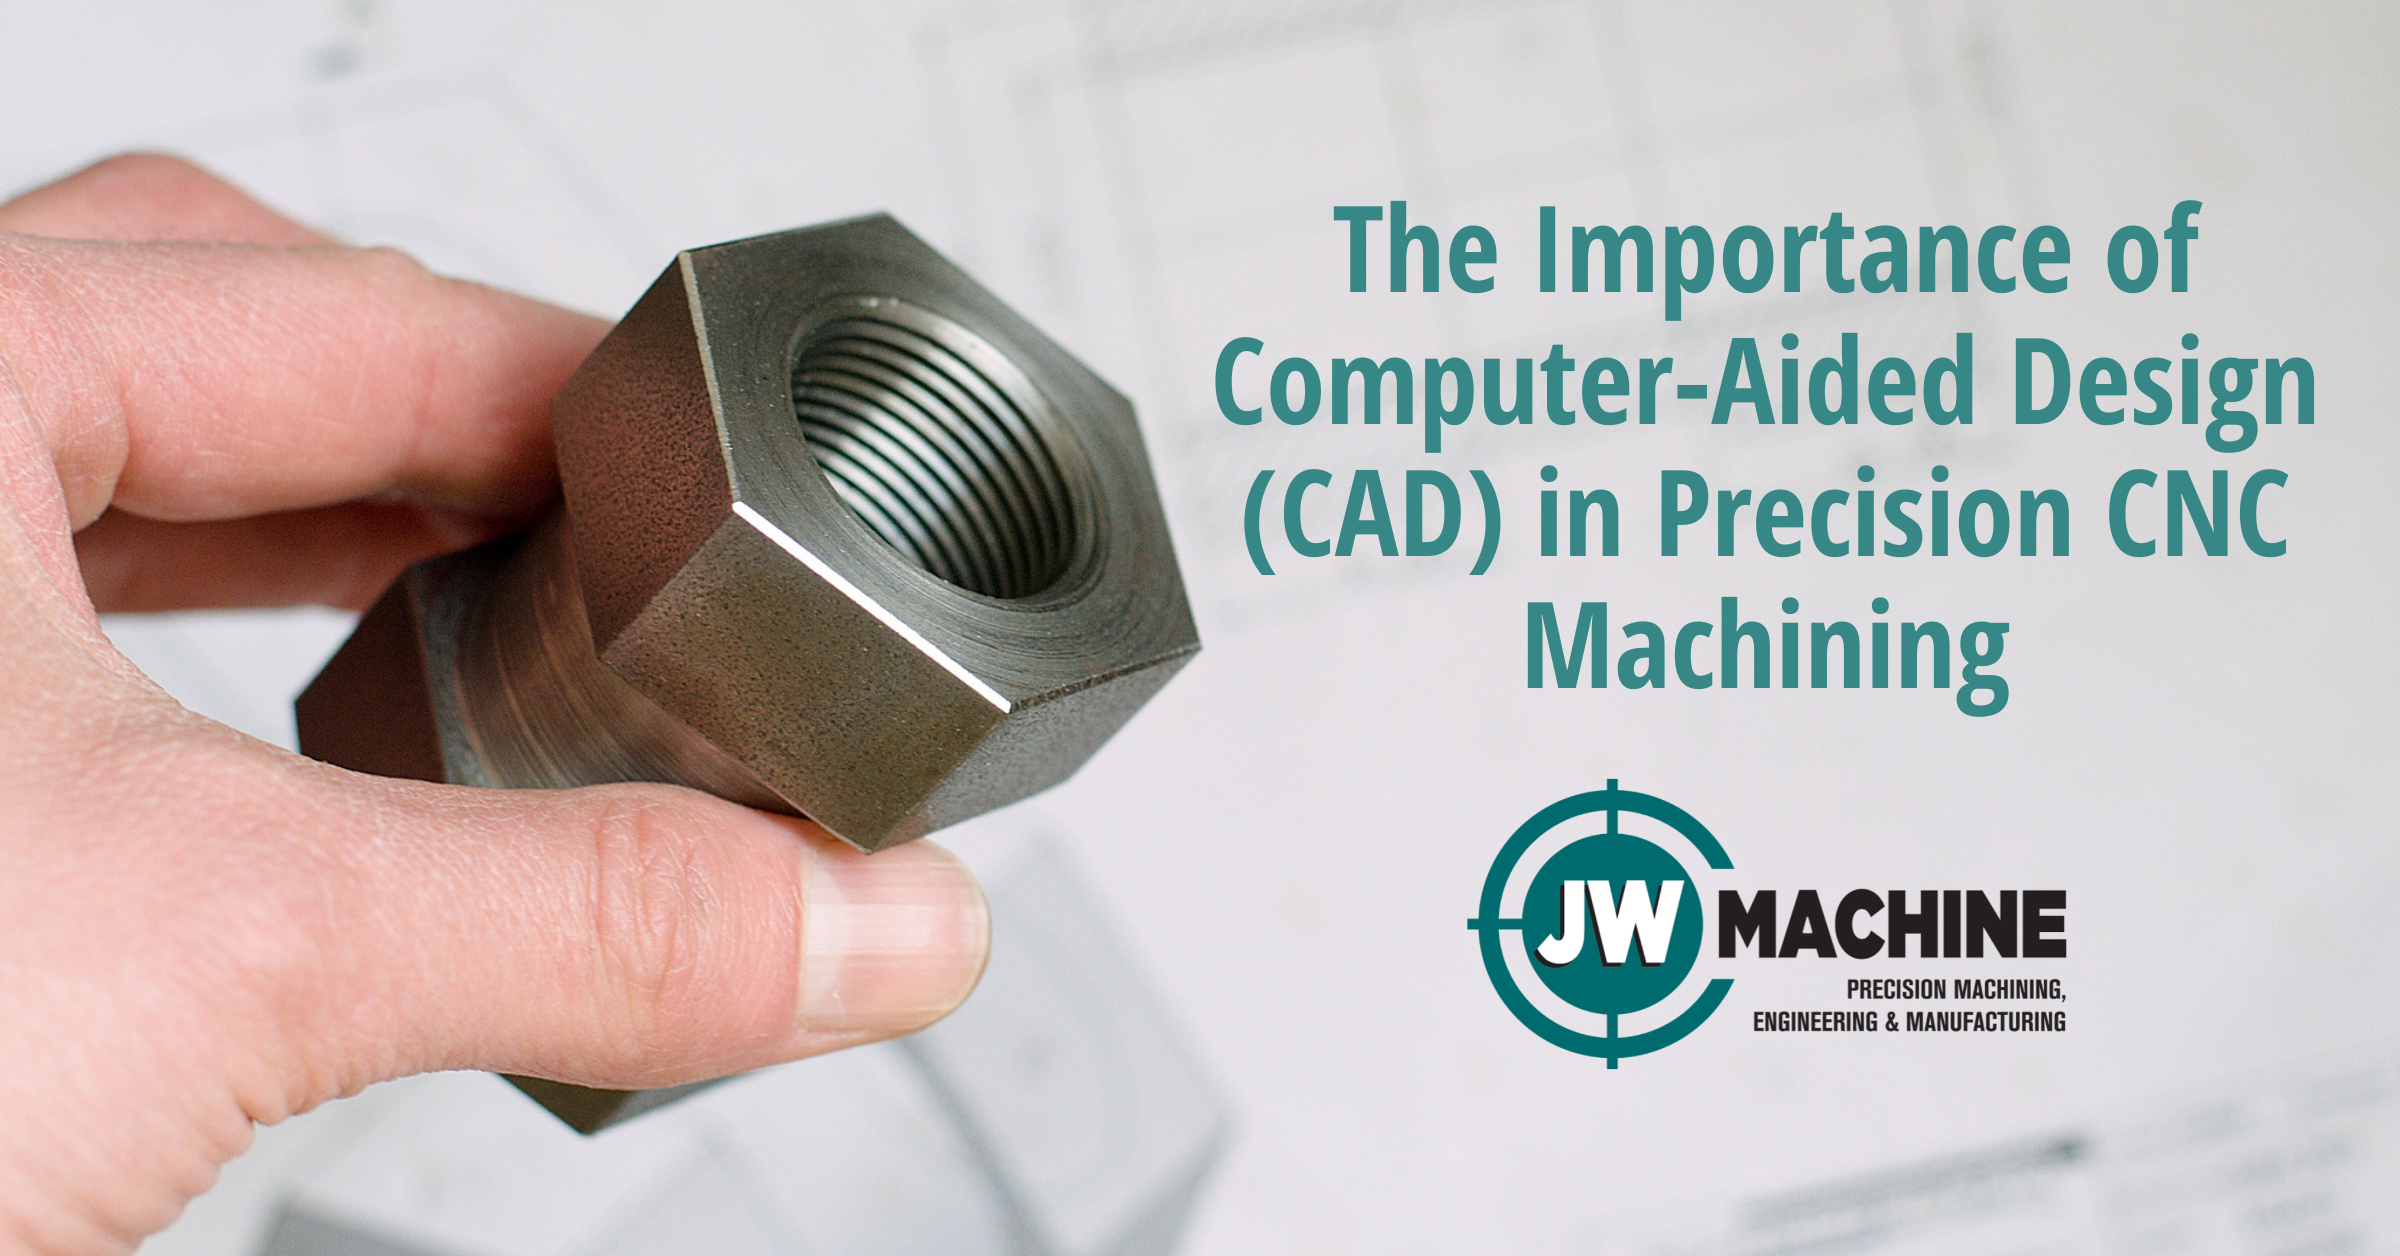 Computer-Aided Design (CAD) in Precision CNC Machining